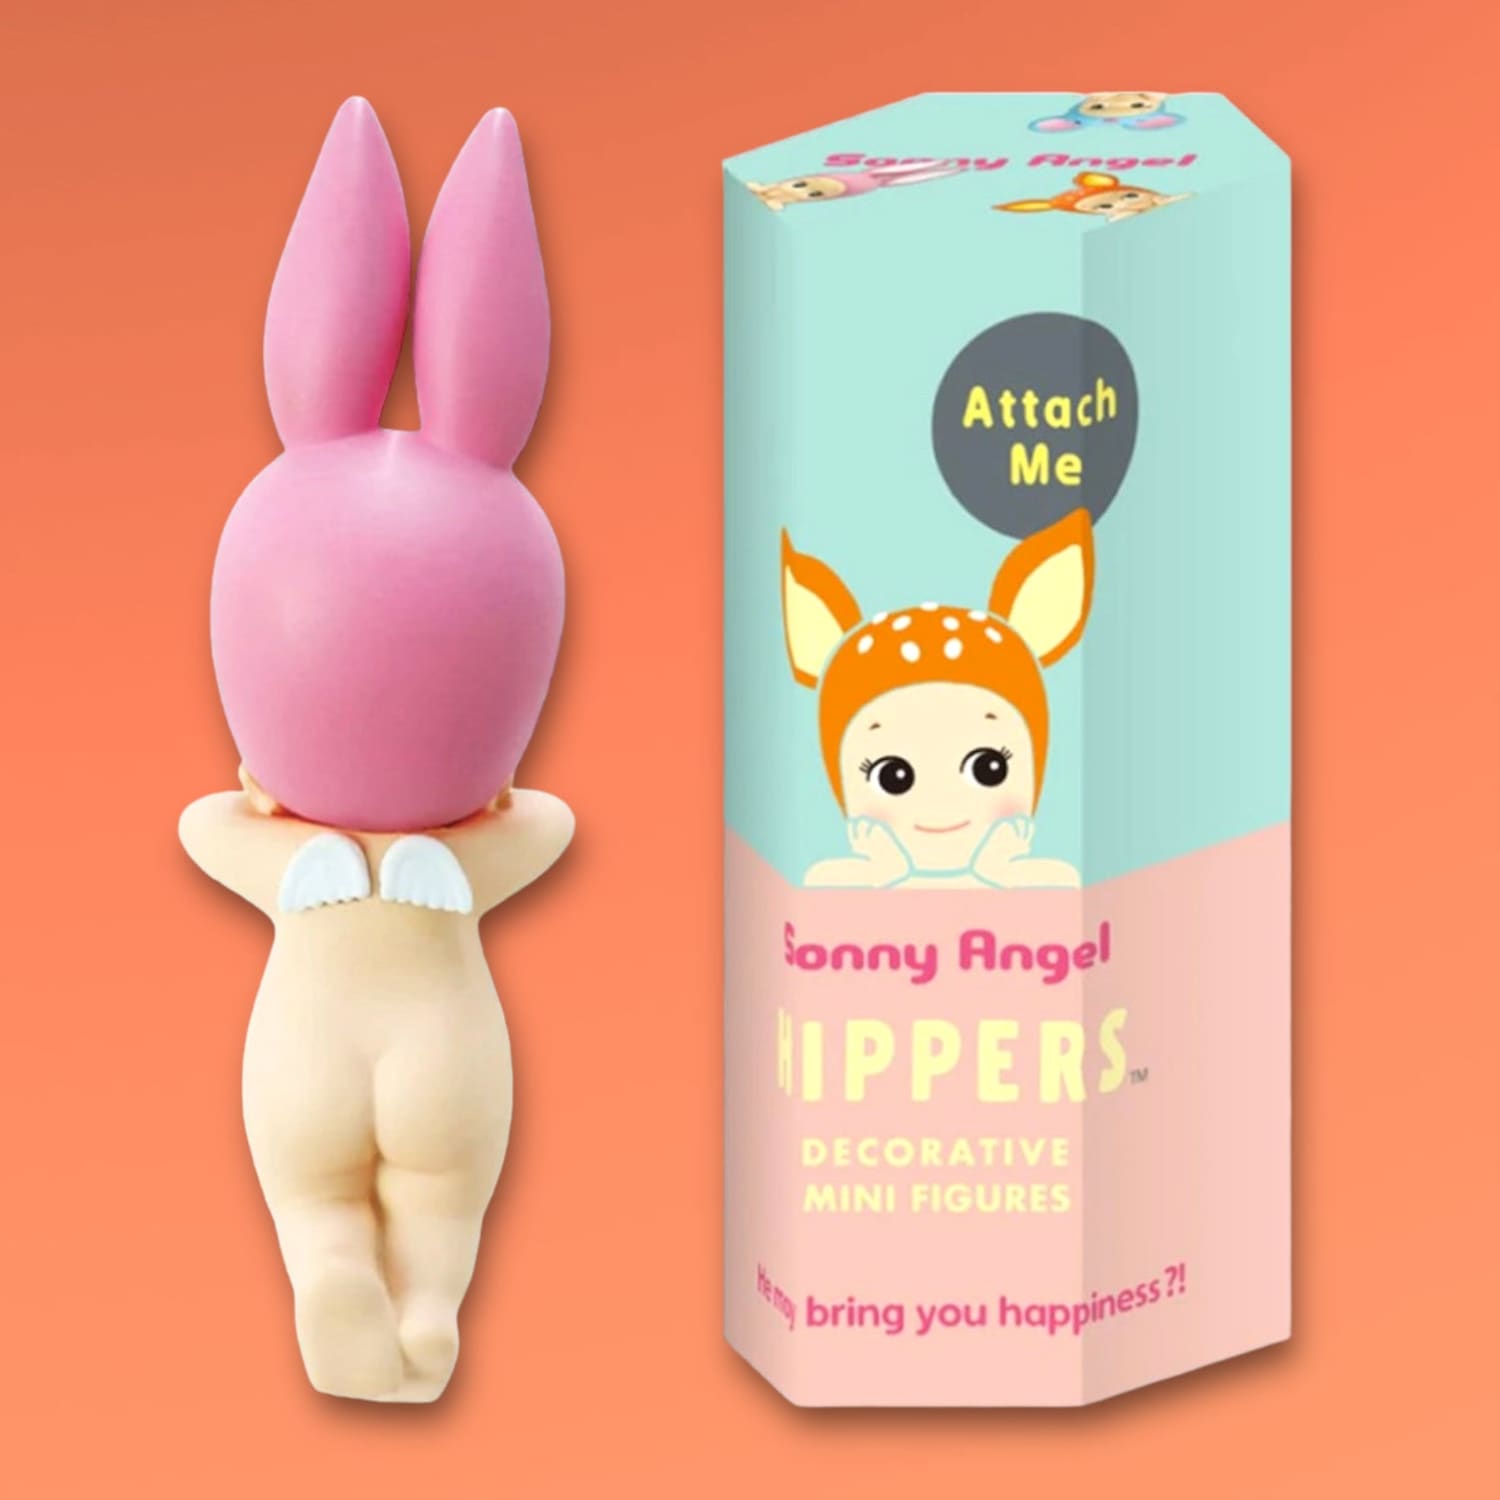 Sonny Angel Hippers - Classic